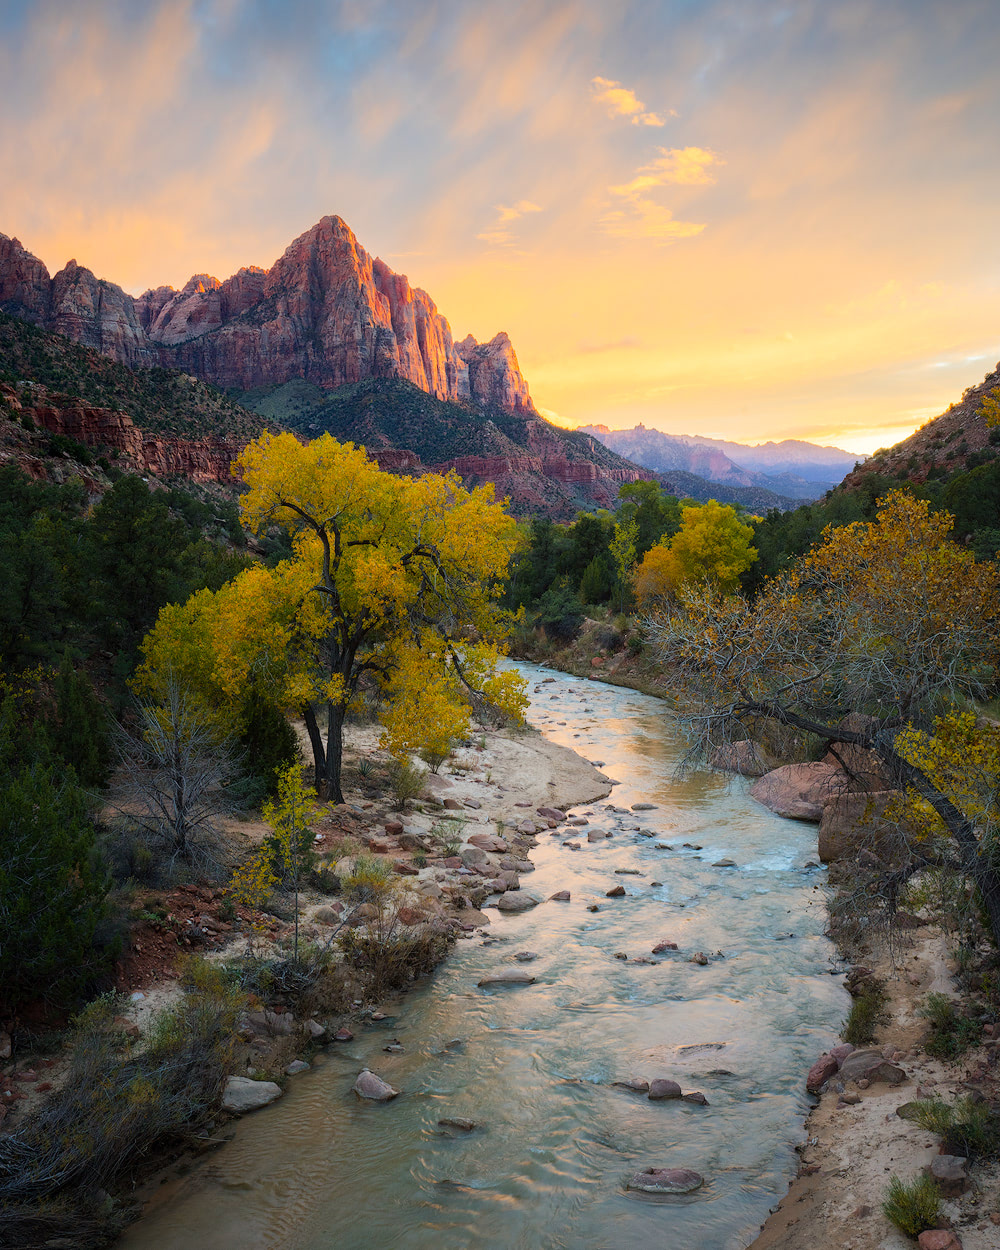 The Ultimate Guide to Exploring Zion National Park - The Watchman Photography